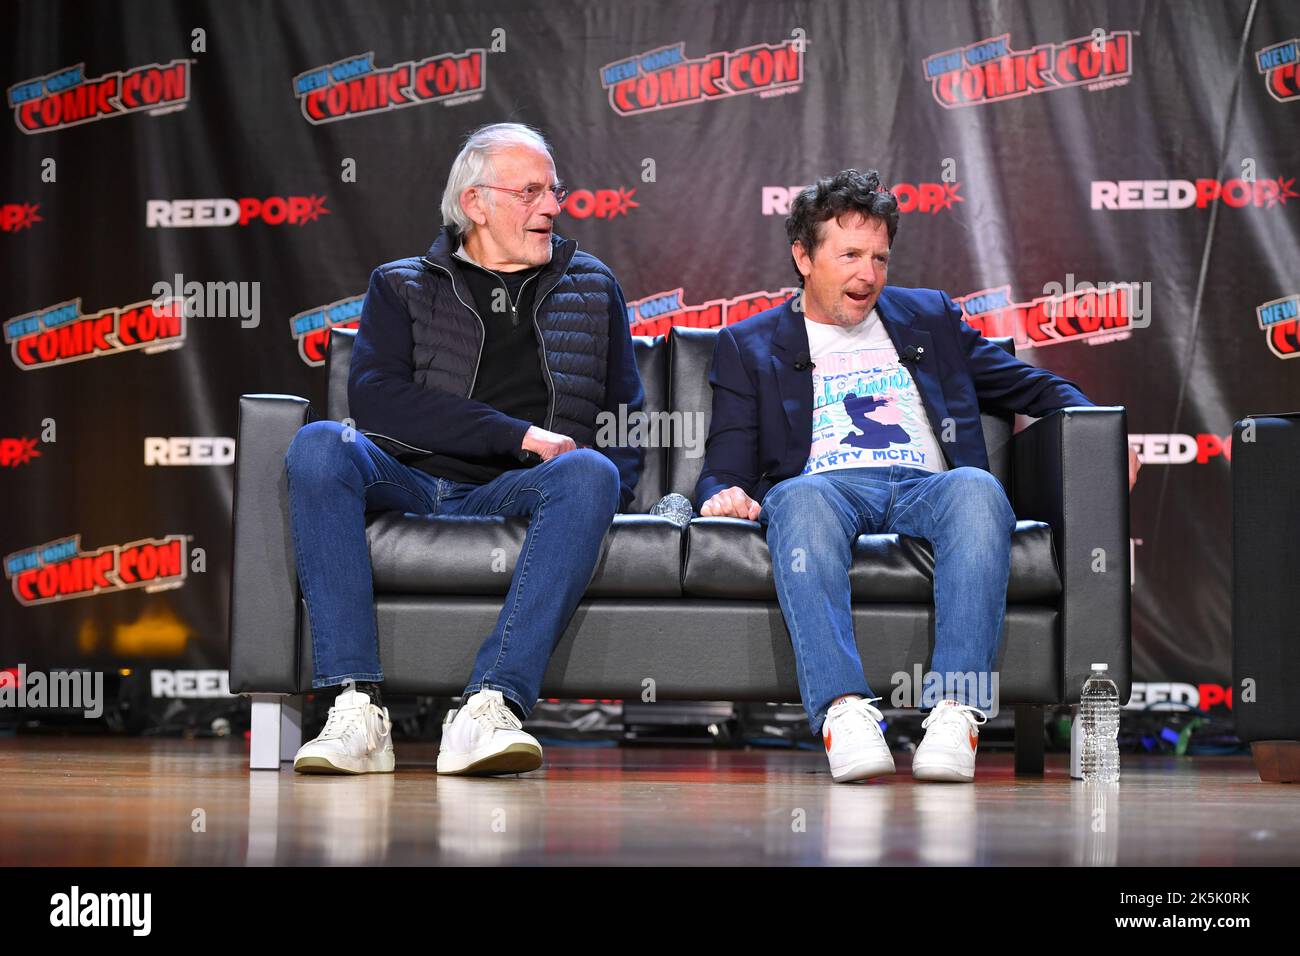 https://c8.alamy.com/comp/2K5K0RK/christopher-lloyd-and-michael-j-fox-attend-the-back-to-the-future-reunion-at-new-york-comic-con-on-october-8-2022-in-new-york-2K5K0RK.jpg